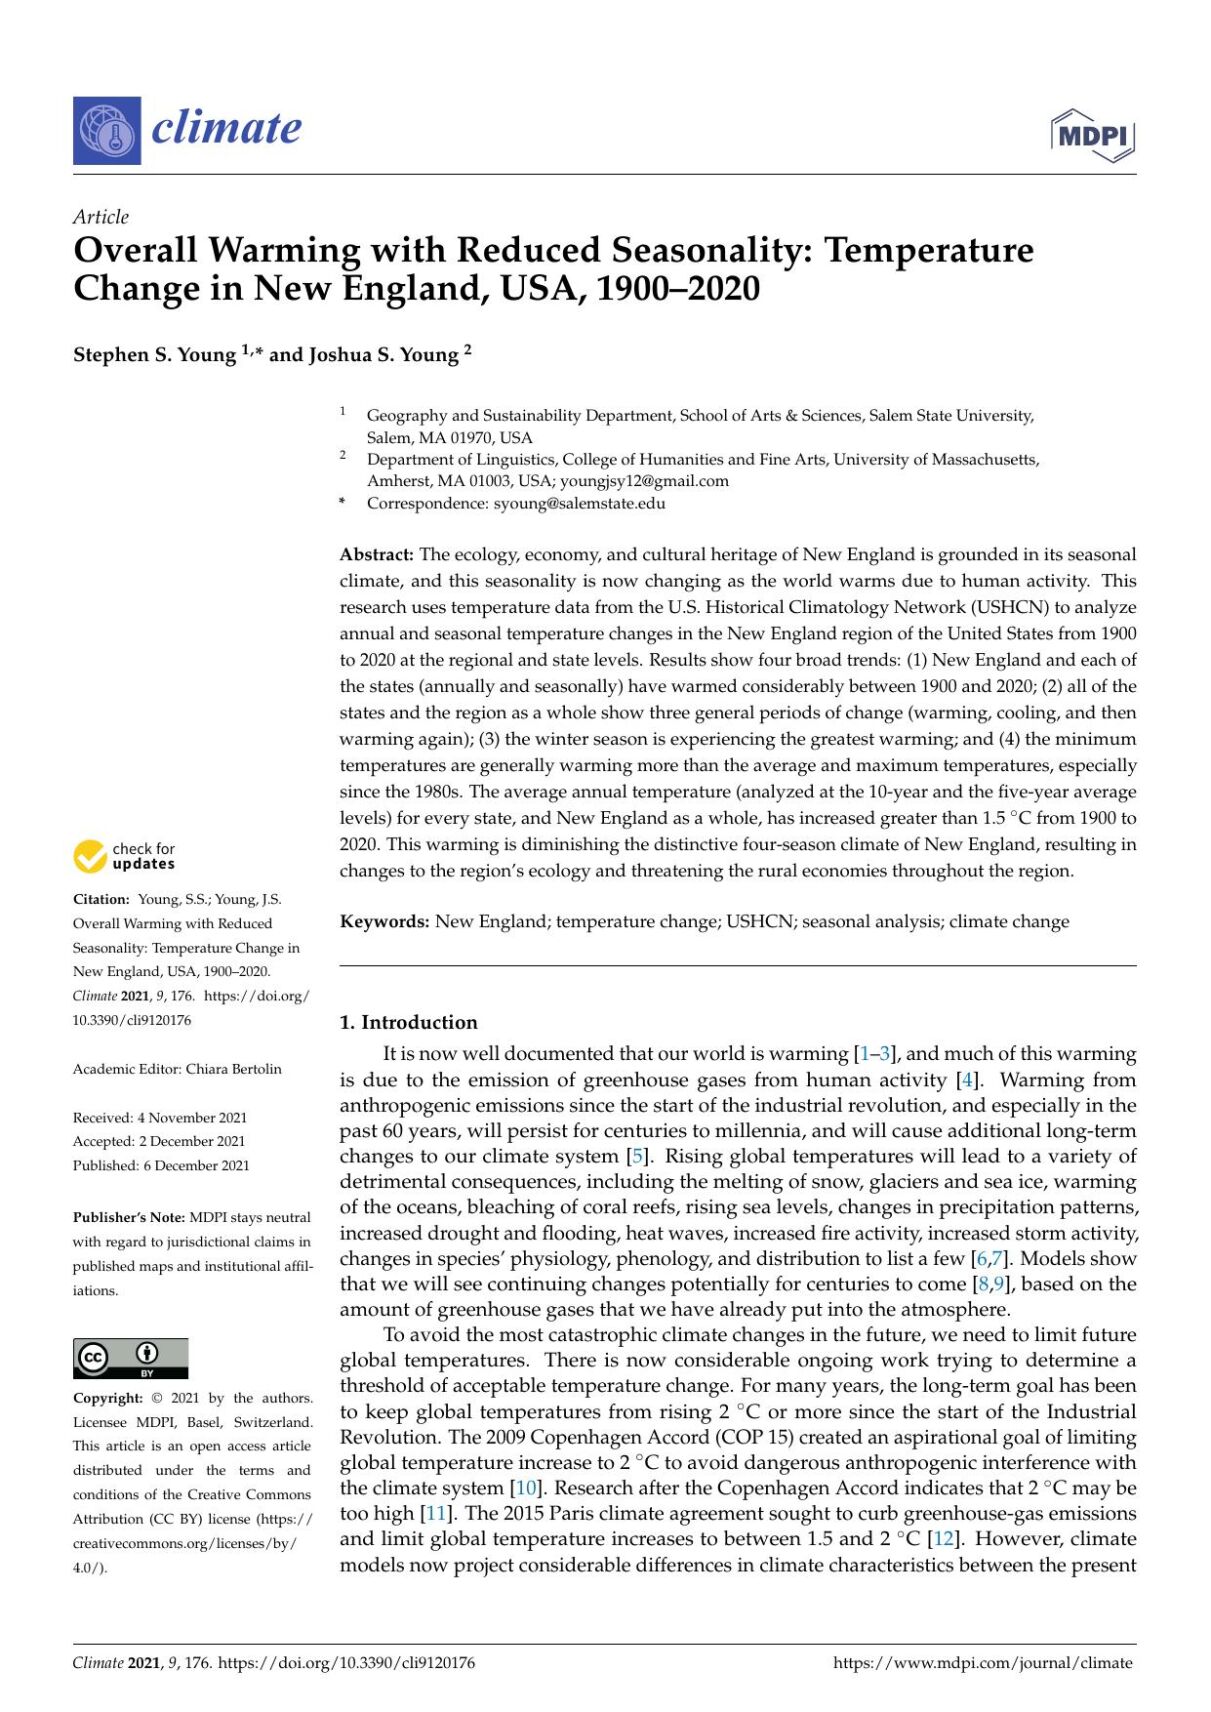 Overall Warming with Reduced Seasonality: Temperature Change in New England, USA, 1900–2020